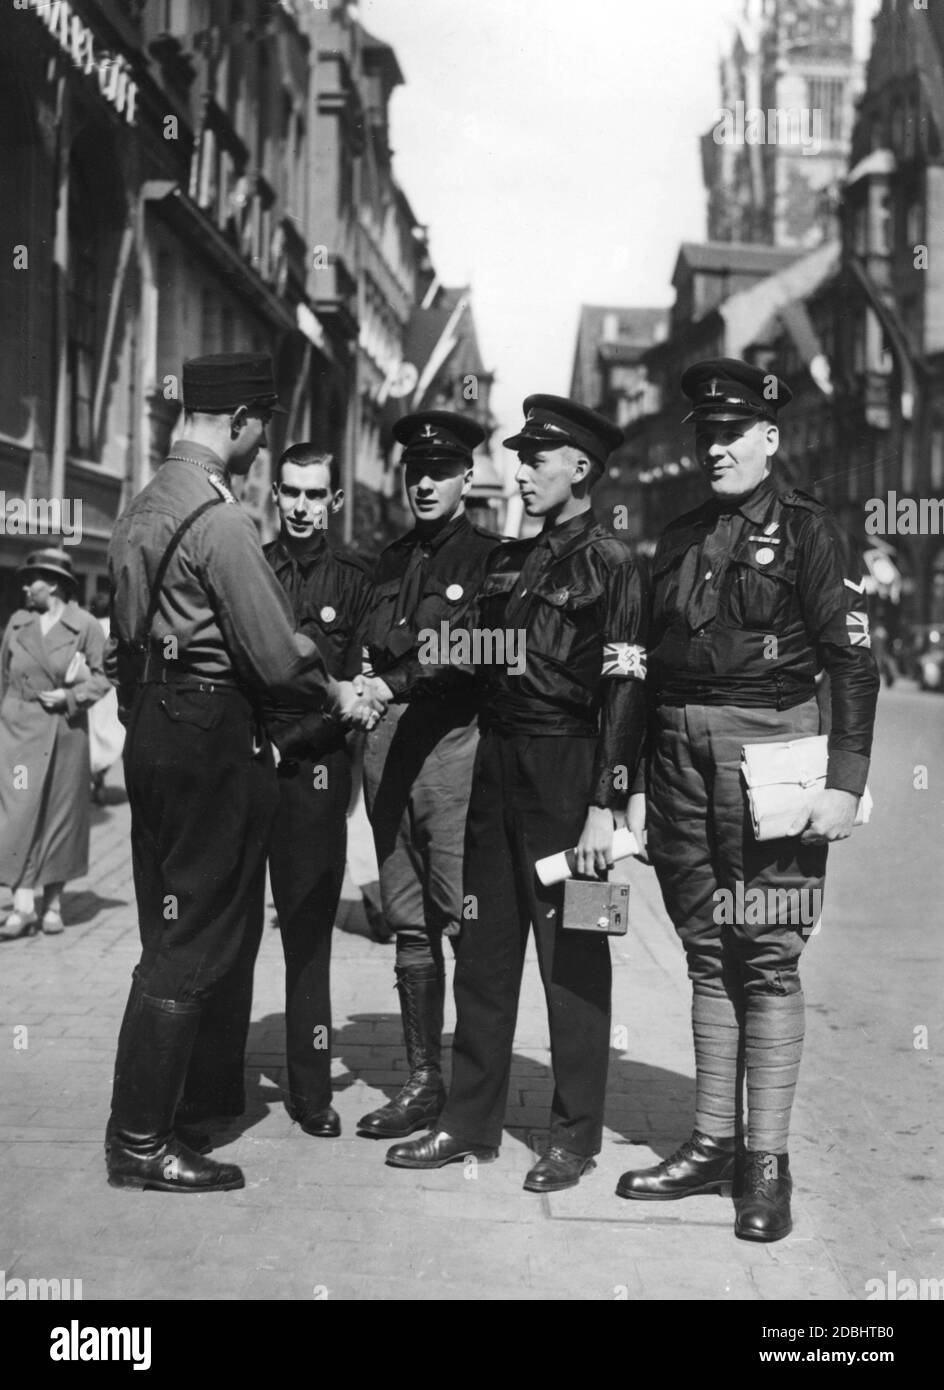 'Members of the ''Imperial Fascists Legion'' came to Nuremberg to attend the Nazi Party Congress in Nuremberg as guests. A member of the SS greets them in the Old Town of Nuremberg.' Stock Photo